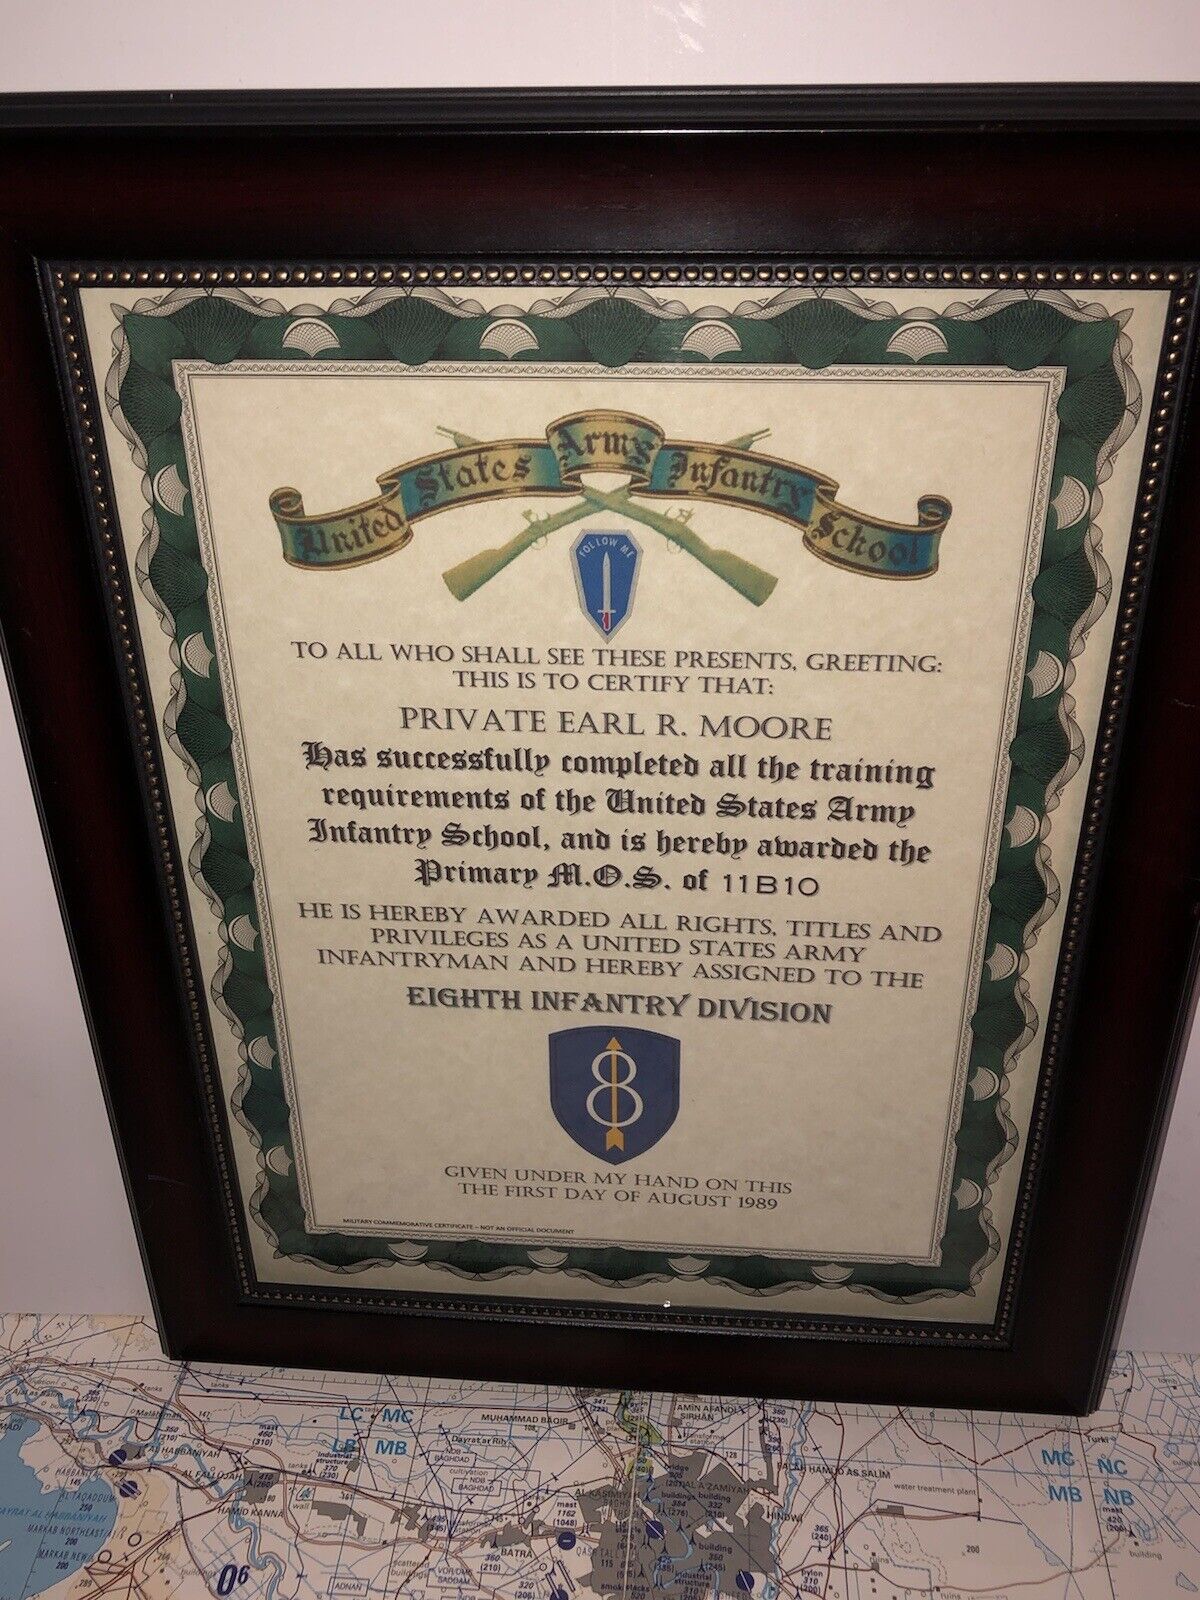 U.S. ARMY (8TH I.D.) INFANTRY TRAINING AND ASSIGNMENT CERTIFICATE